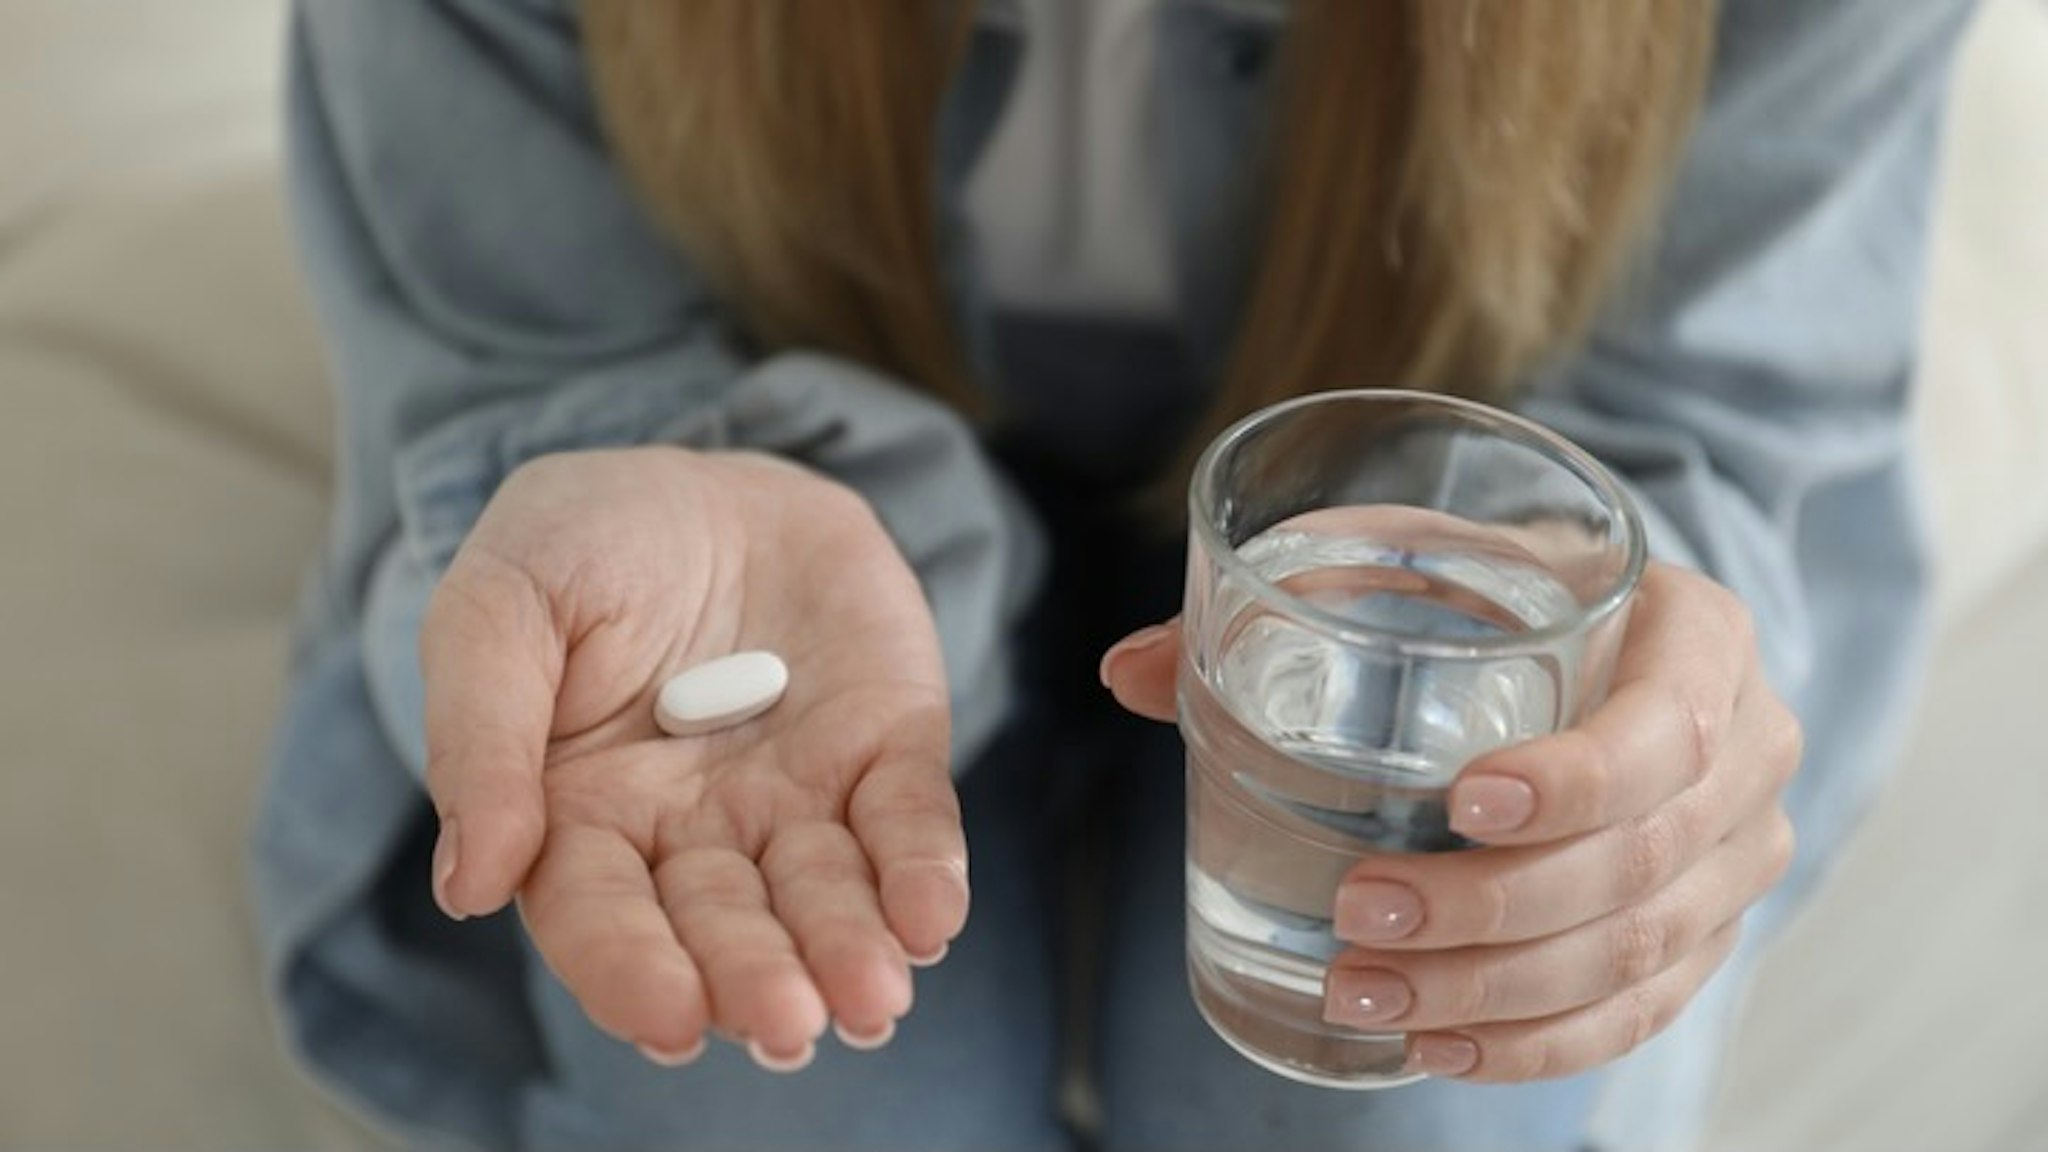 Young woman with abortion pill and glass of water on blurred background, closeup - stock photo Young woman with abortion pill and glass of water on blurred background, closeup Liudmila Chernetska via Getty Images